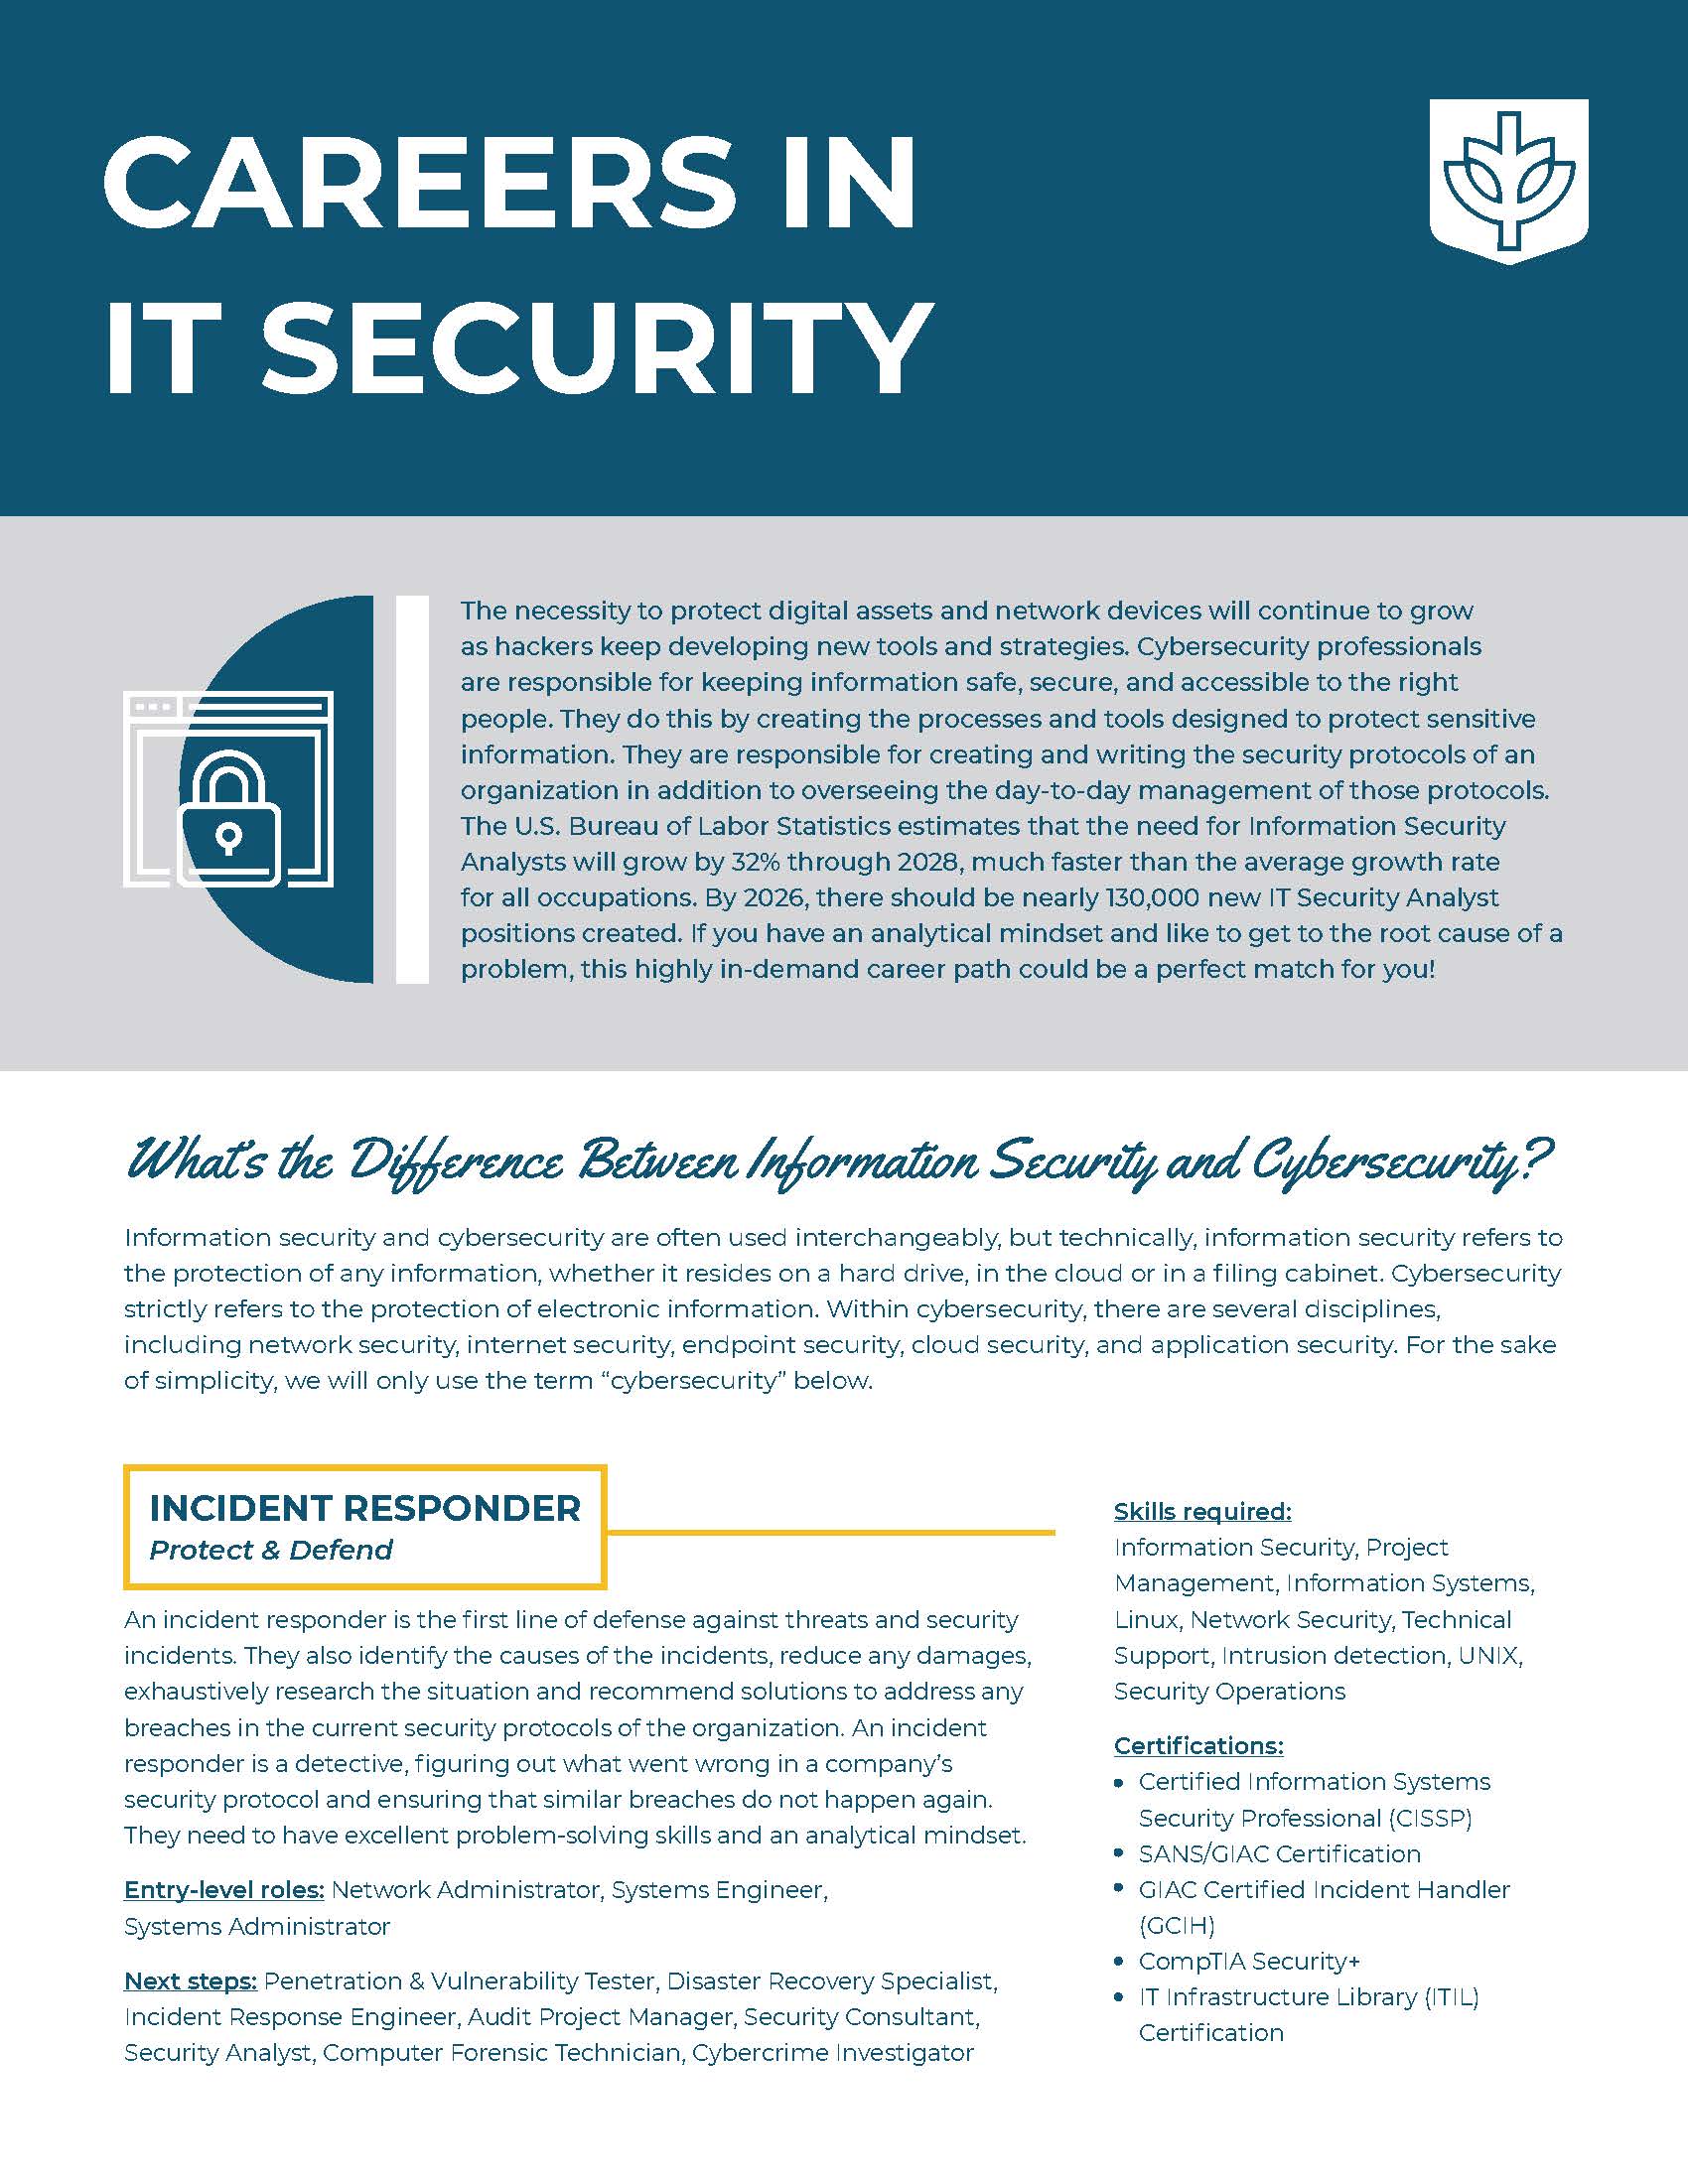 Careers in IT Security